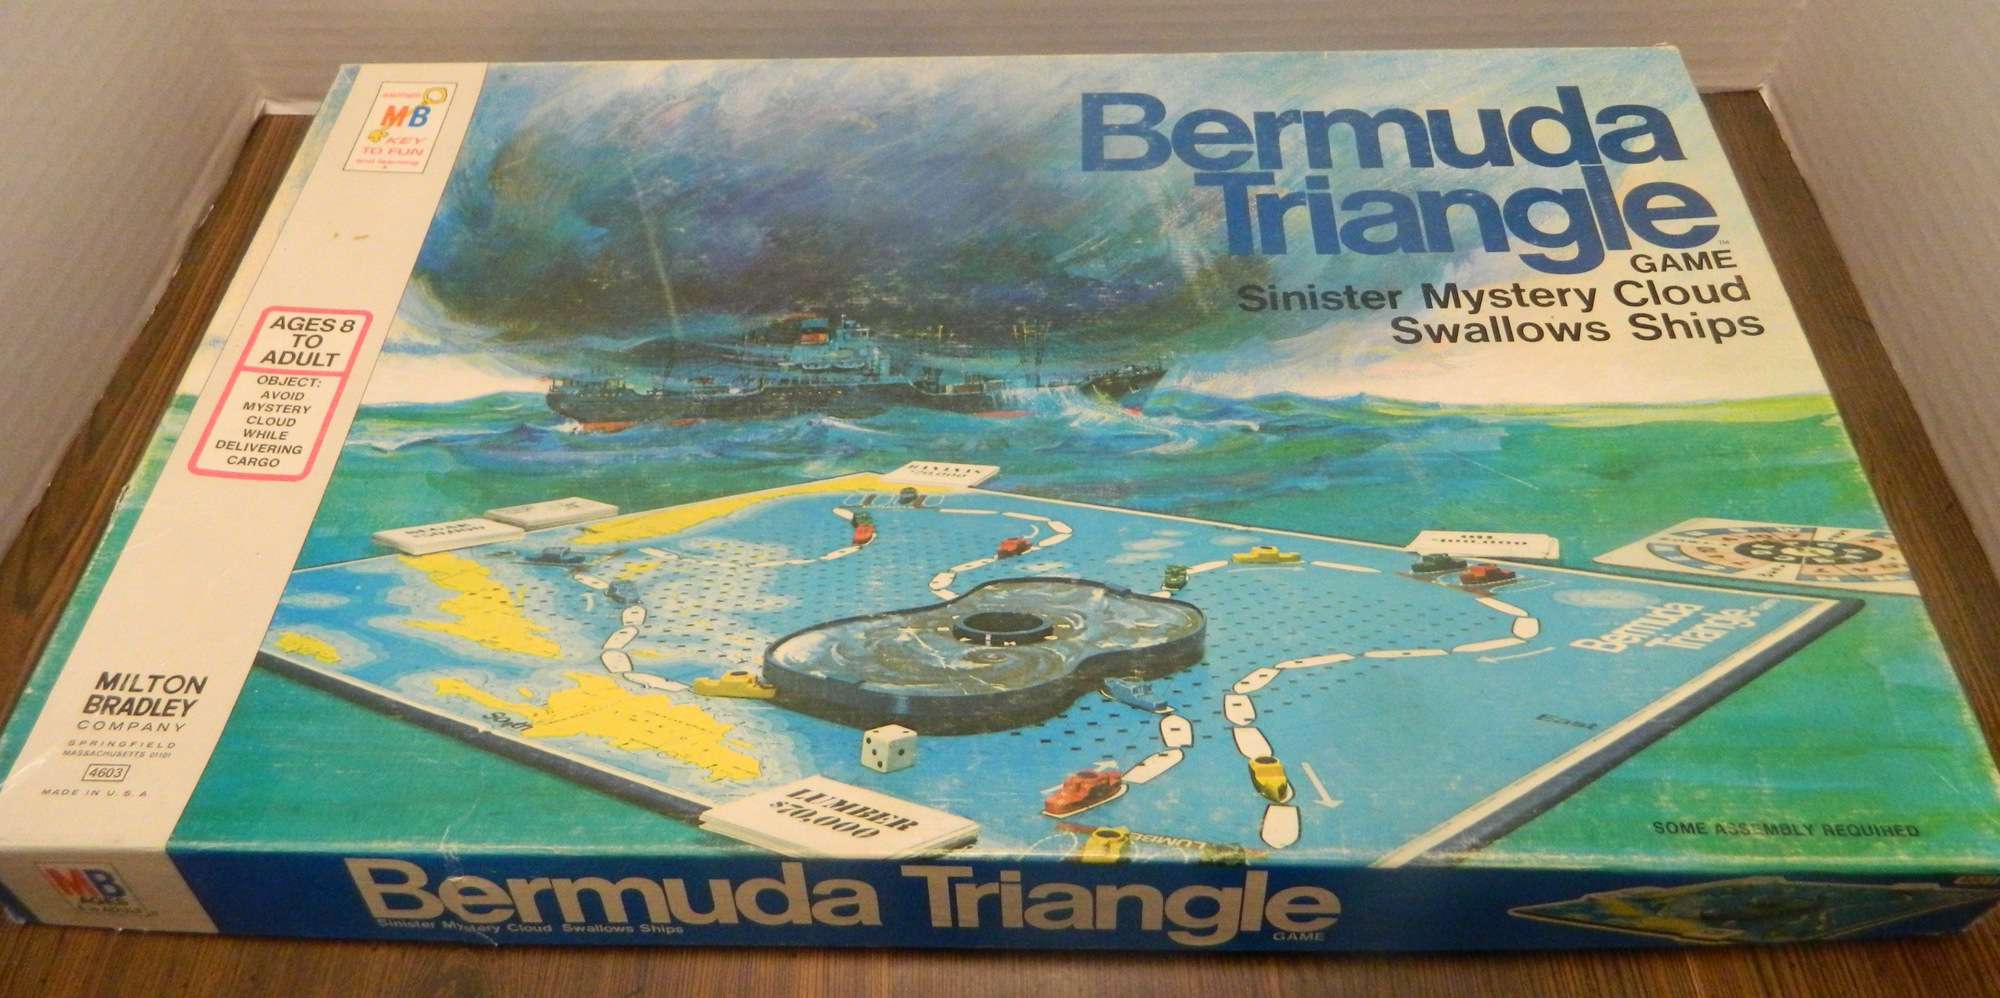 A picture of the box for the game Bermuda Triangle